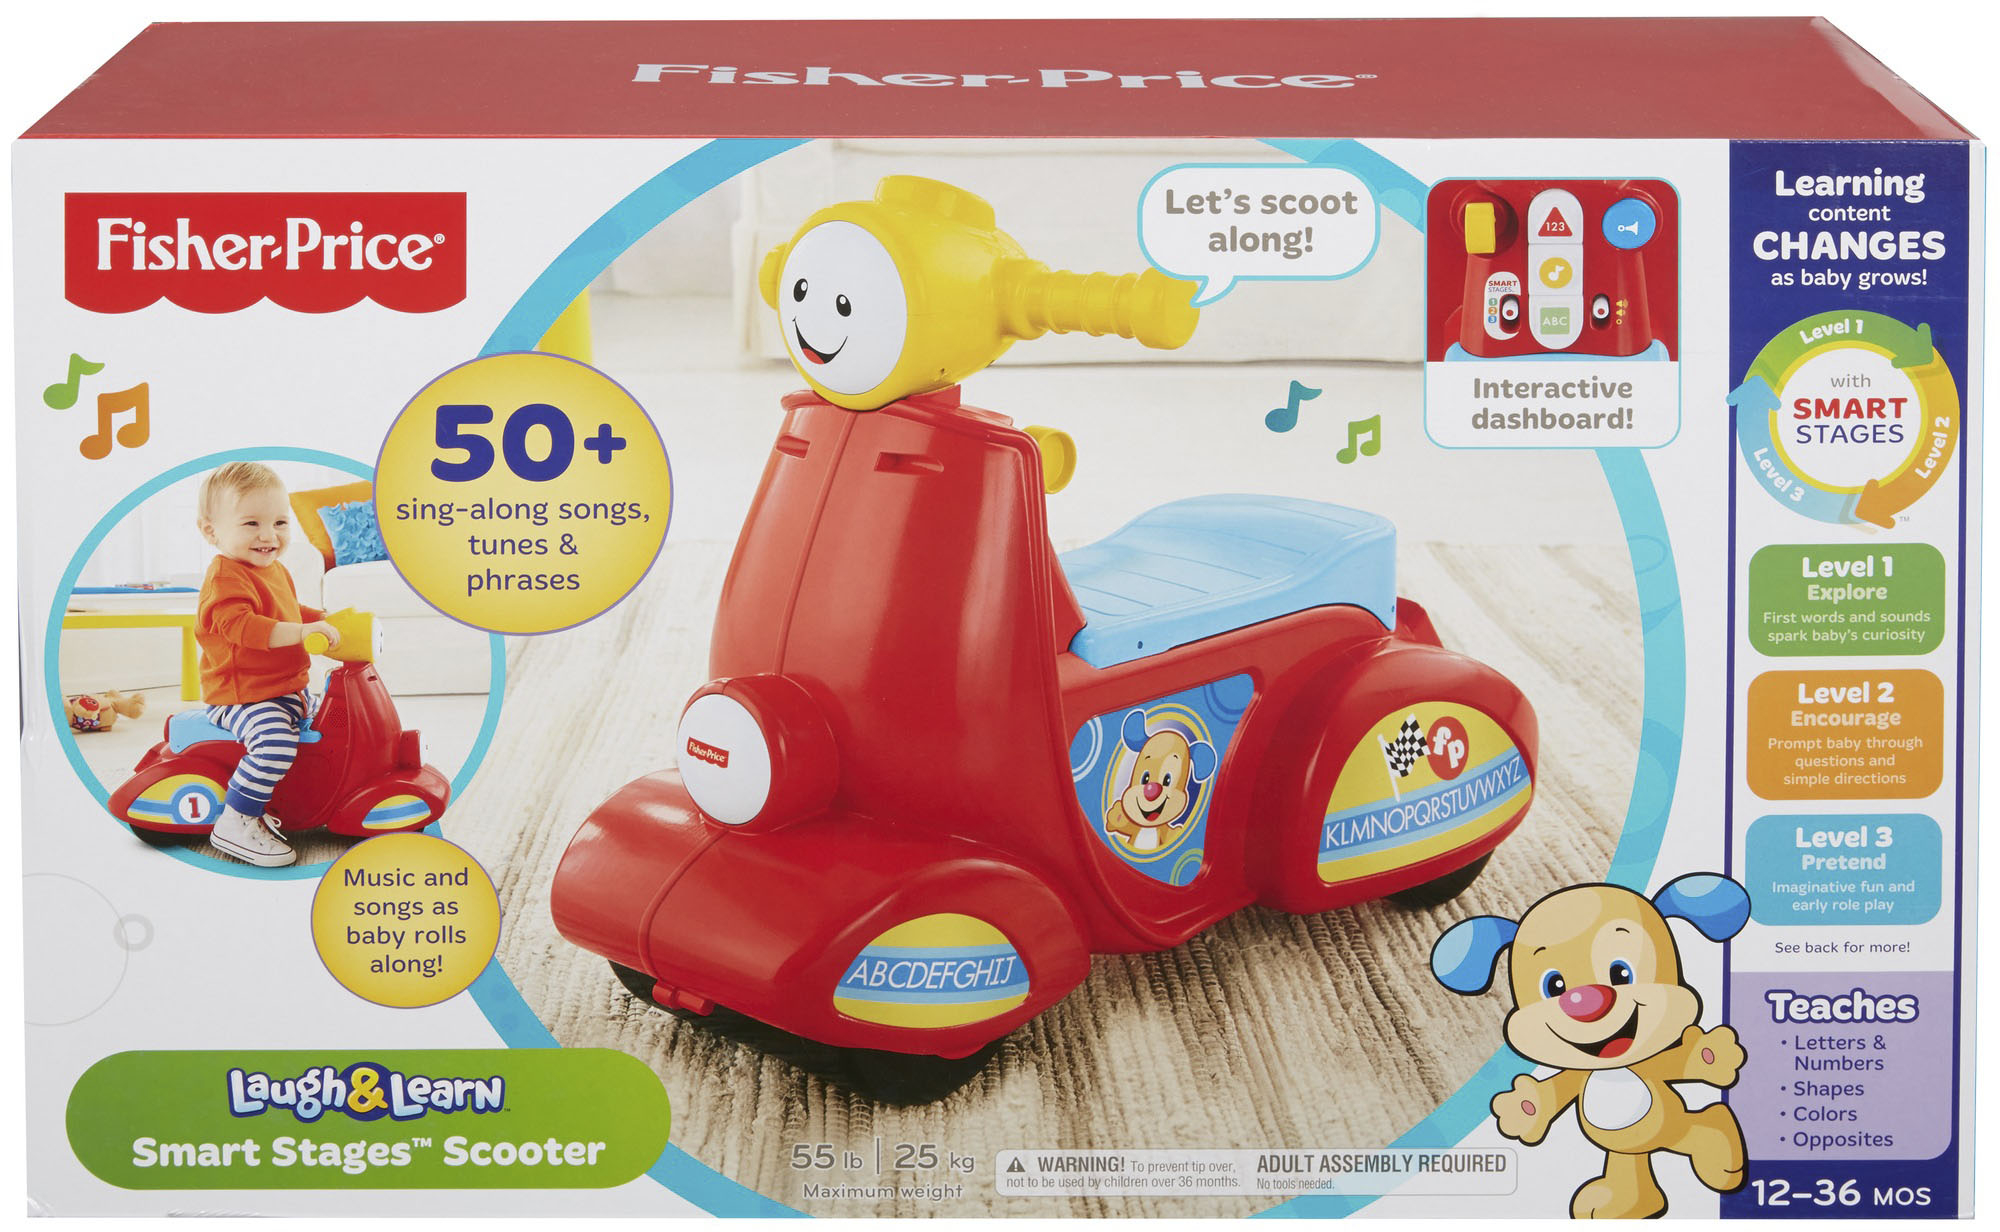 Smart Stages Multi-lingiual Interactive Baby Scooter Fisher-Price Laugh & Learn 